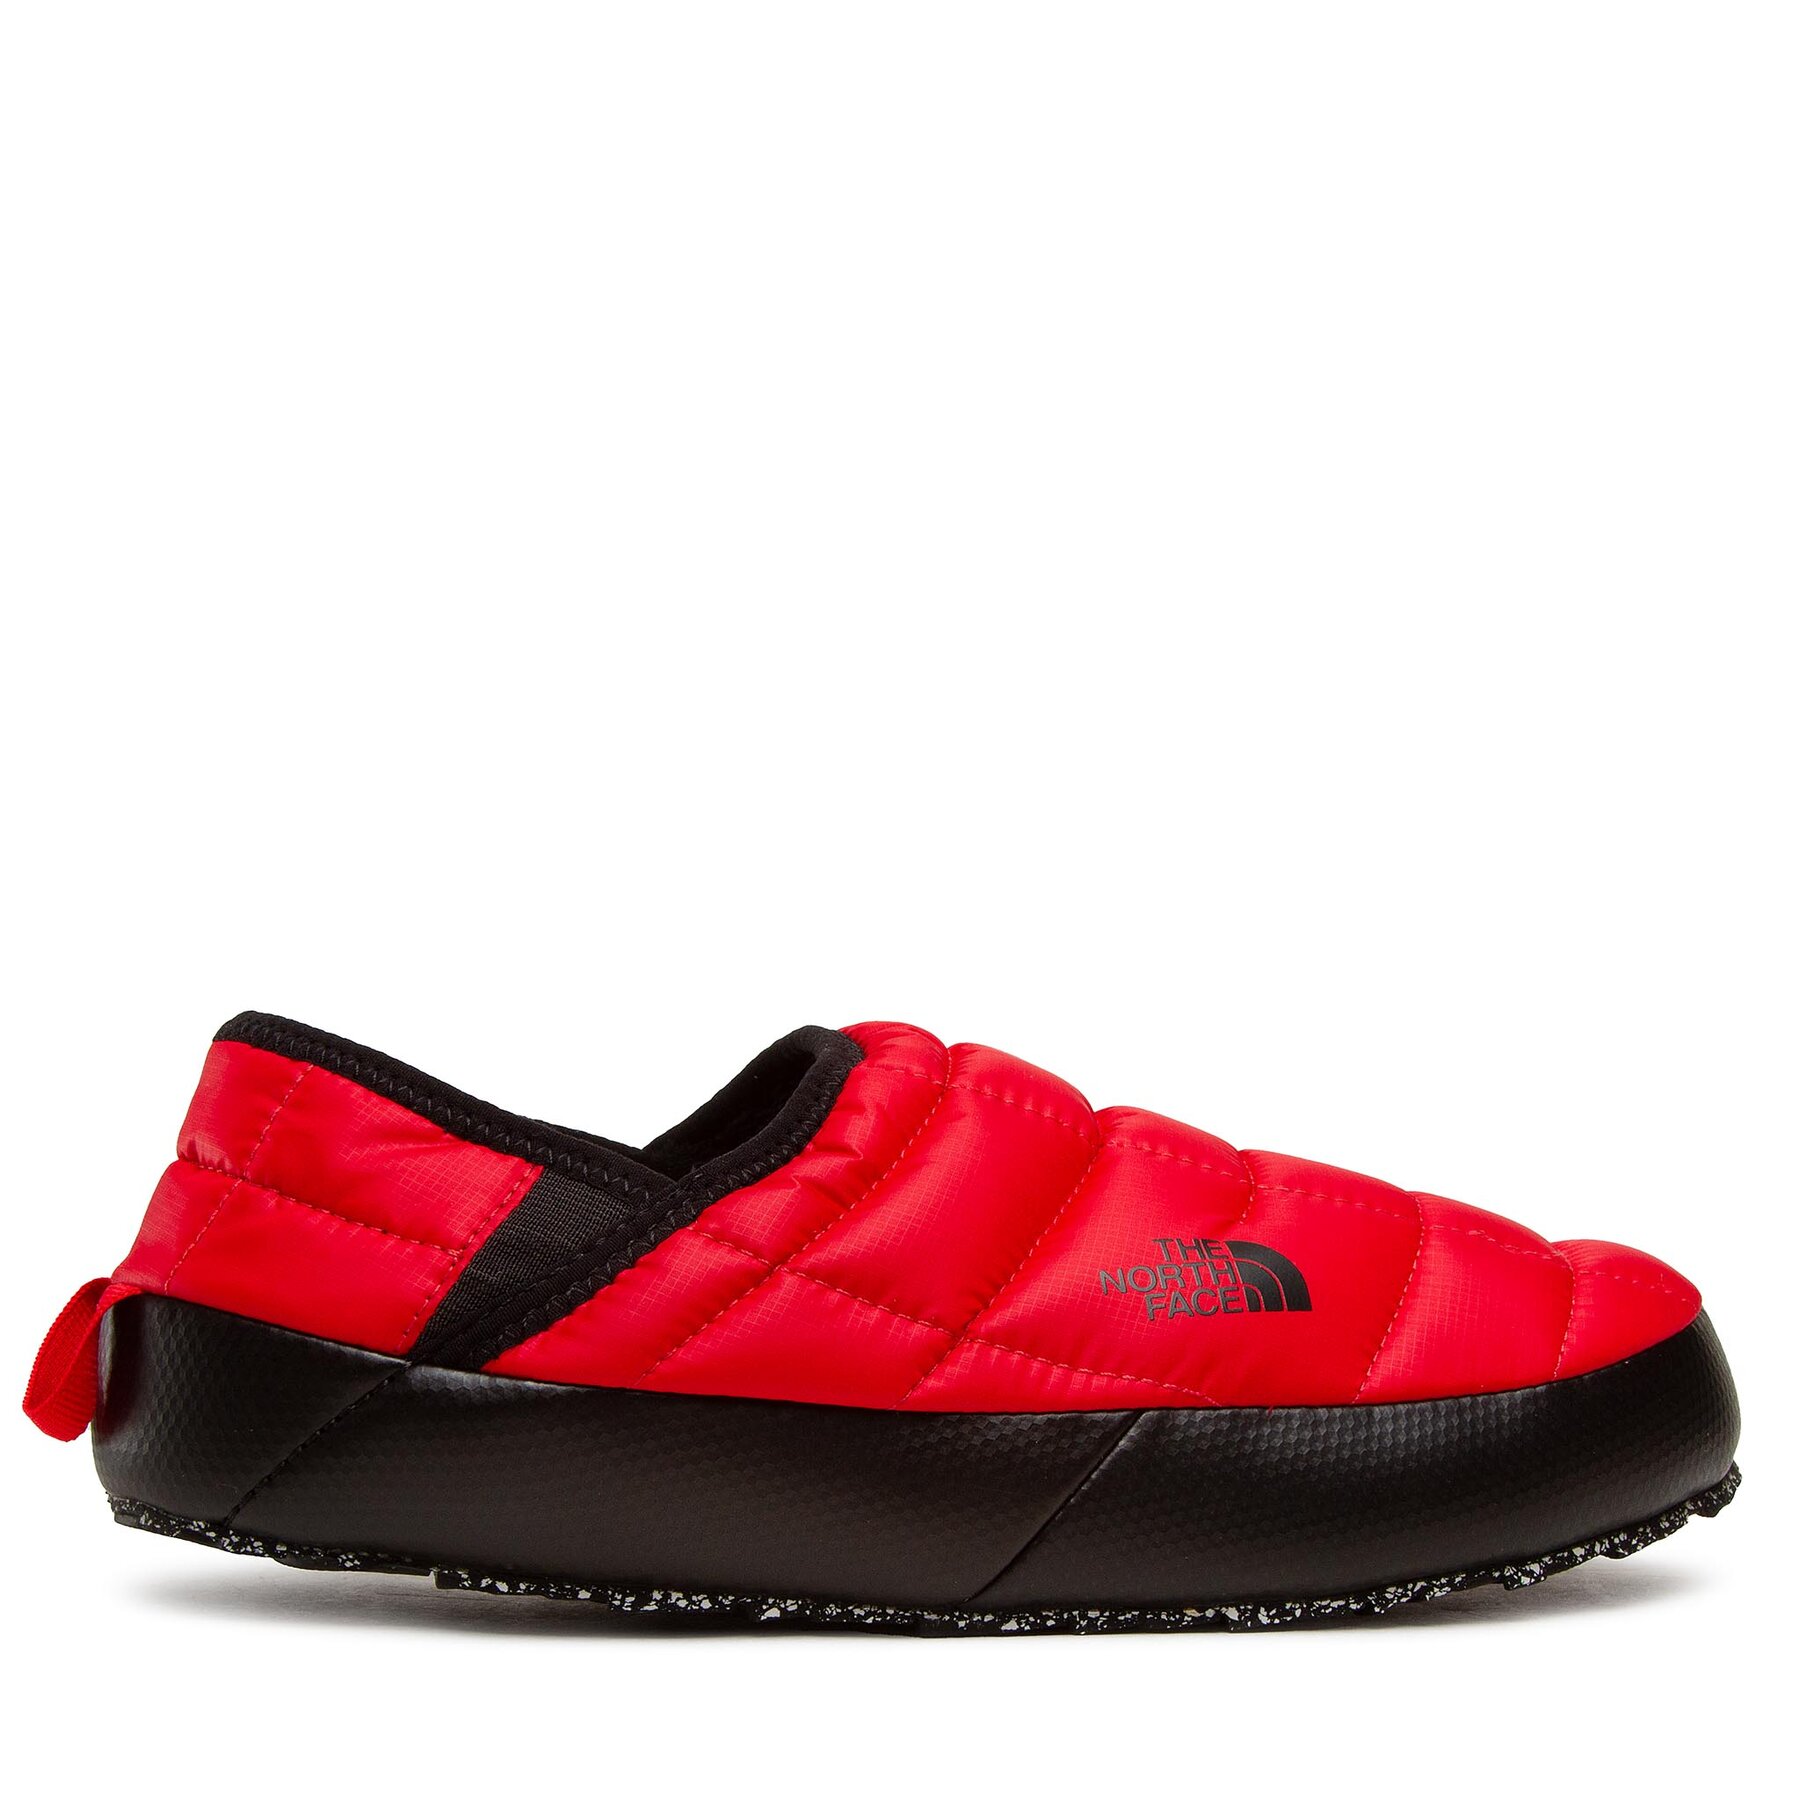 Papuče The North Face Thermoball Traction Mule V NF0A3UZNKZ31-070 Tnf Red/Tnf Black